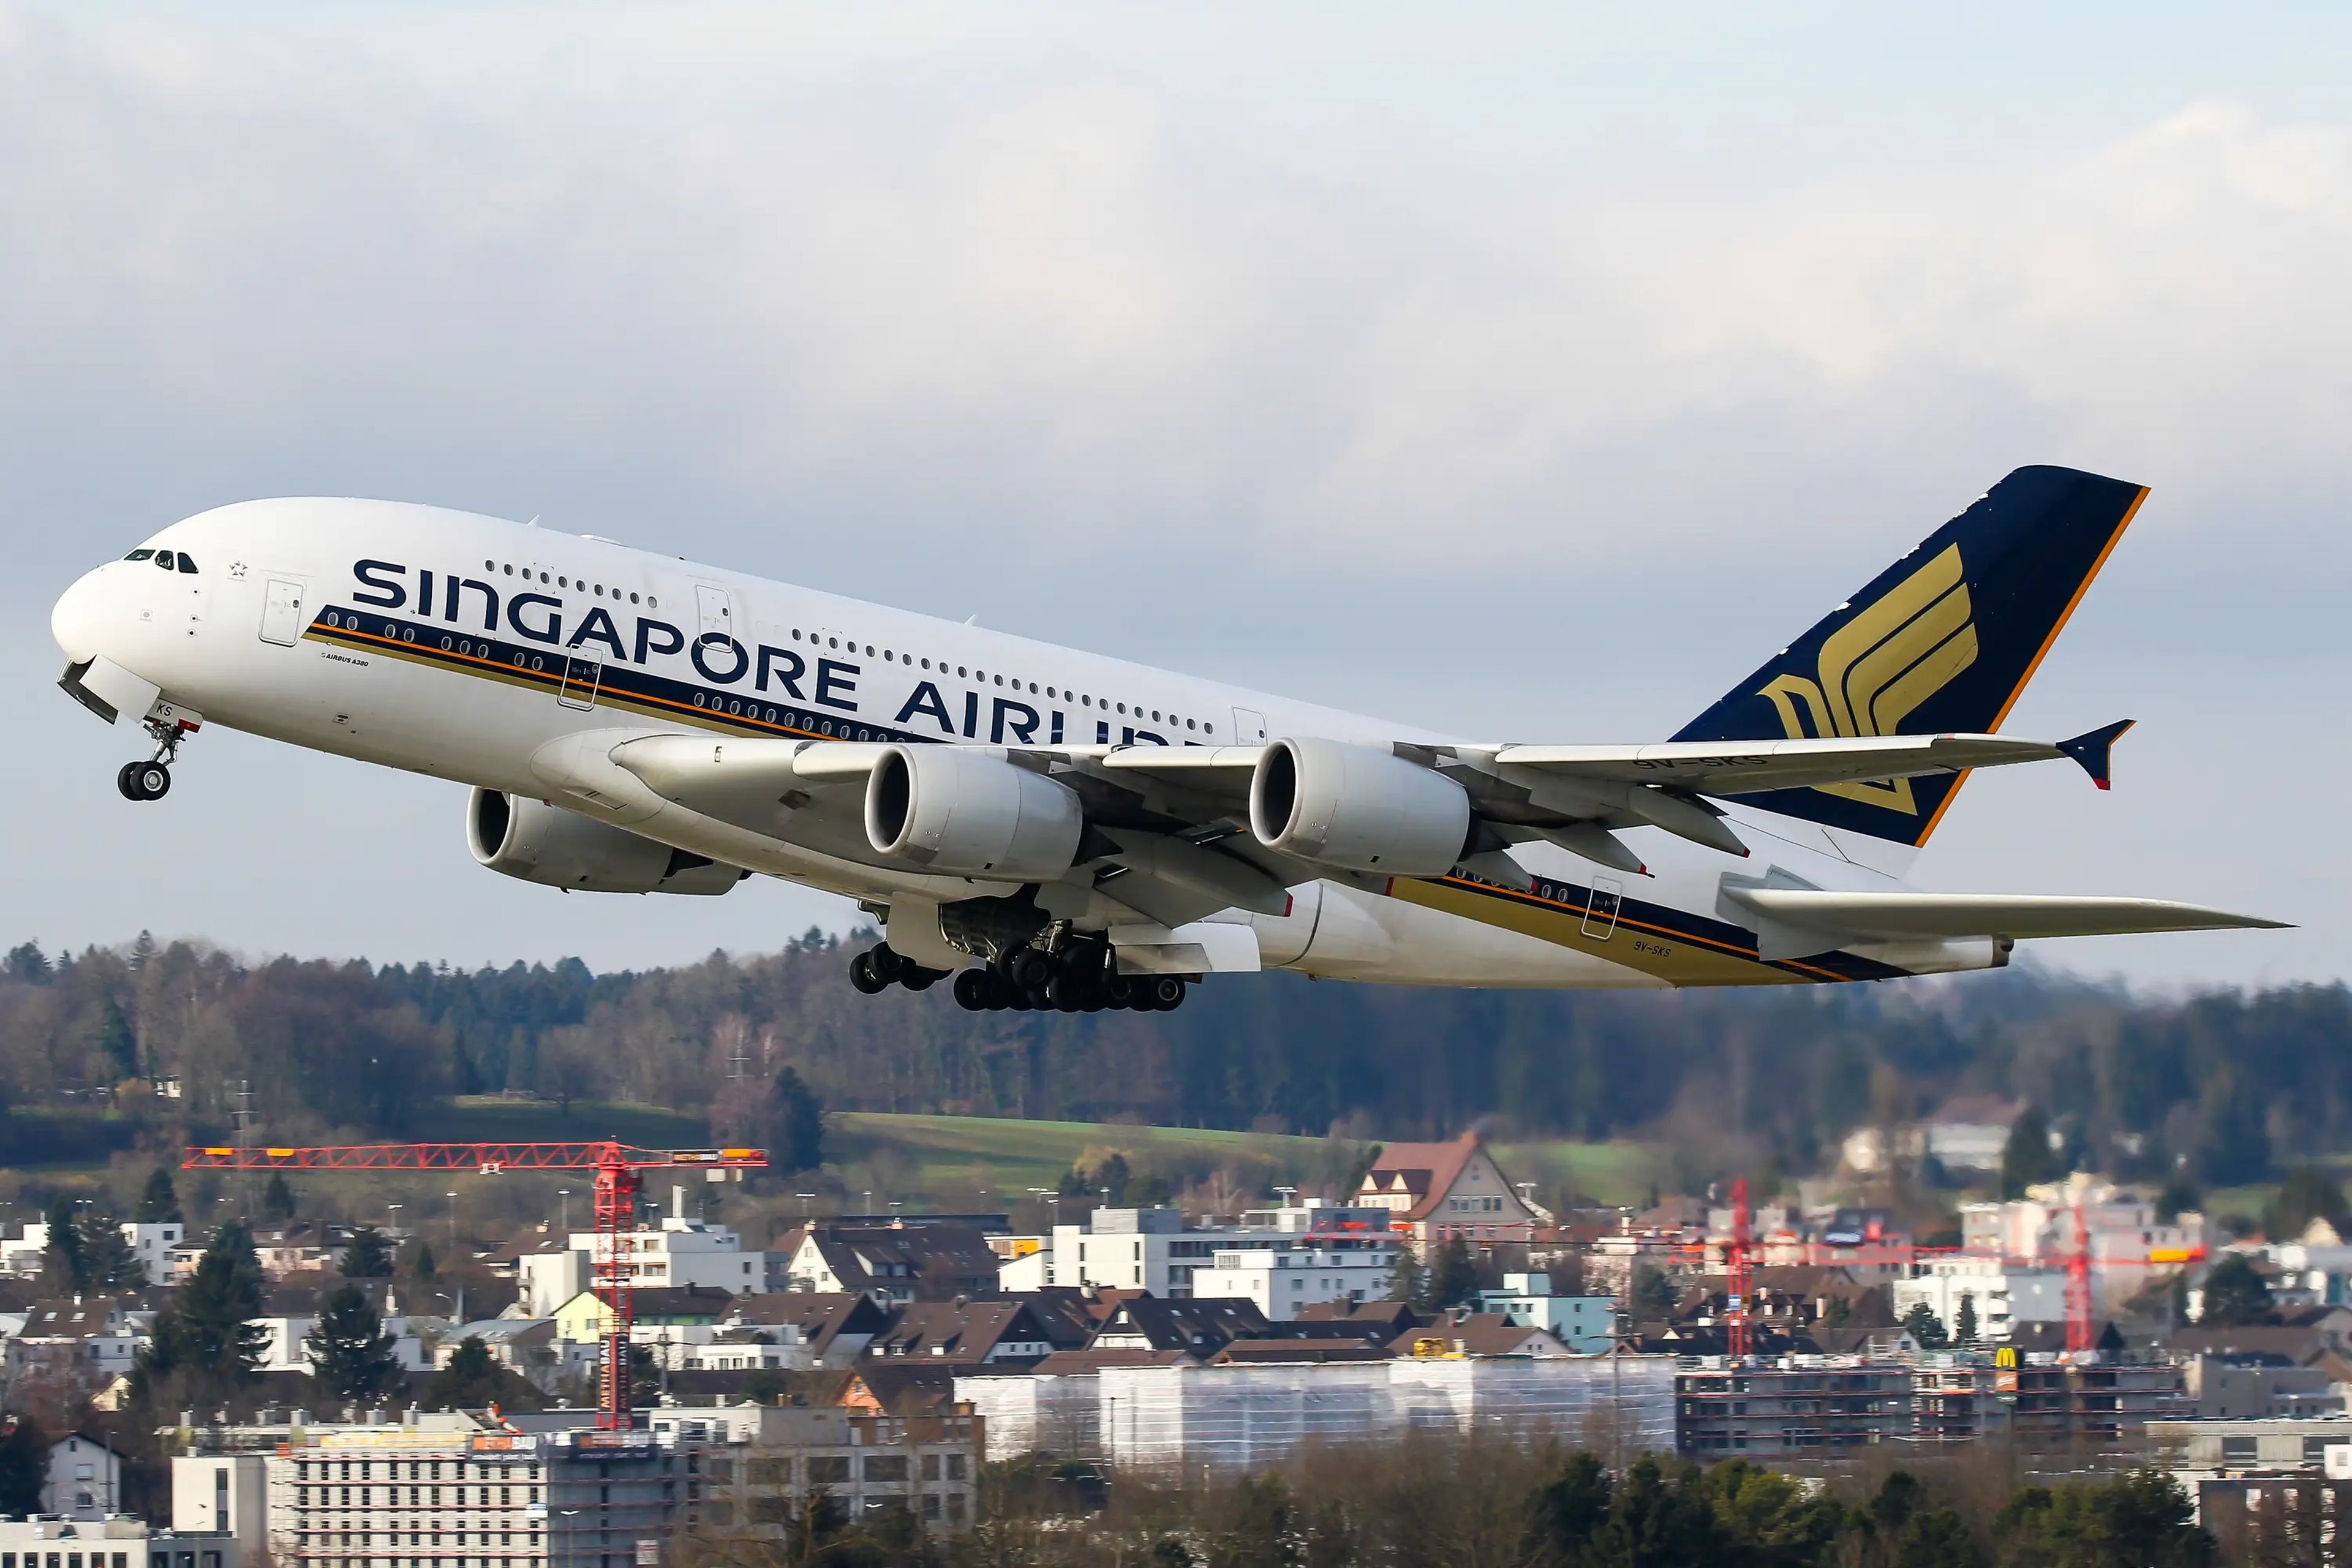 Singapore Airlines Airbus A380-800.